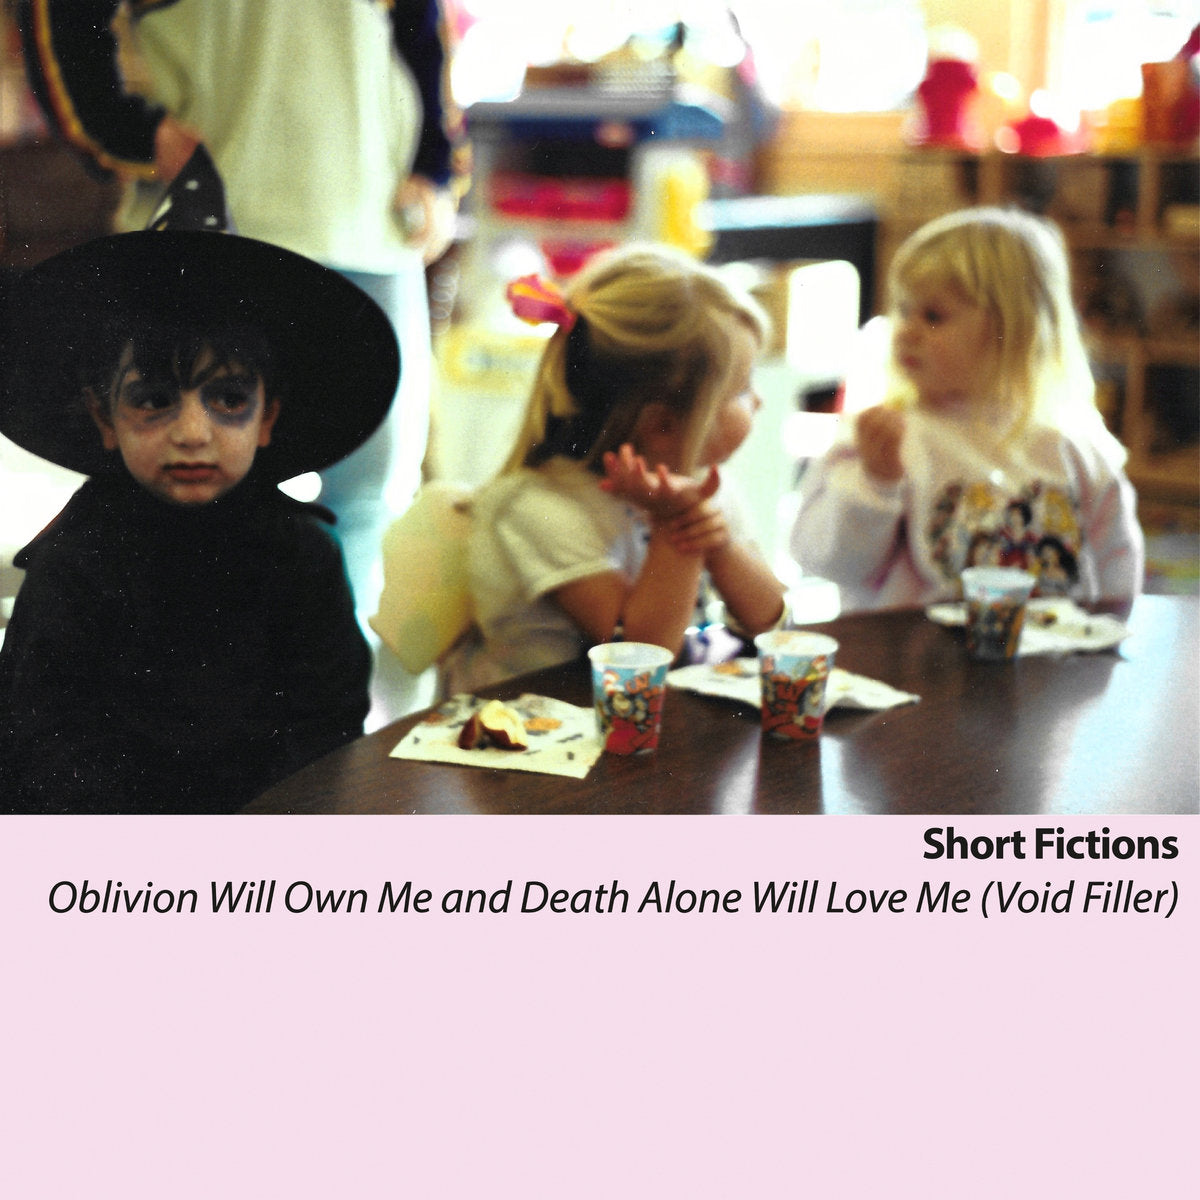 Short Fictions "Oblivion Will Own Me and Death Alone Will Love Me (Void Filler)" LP